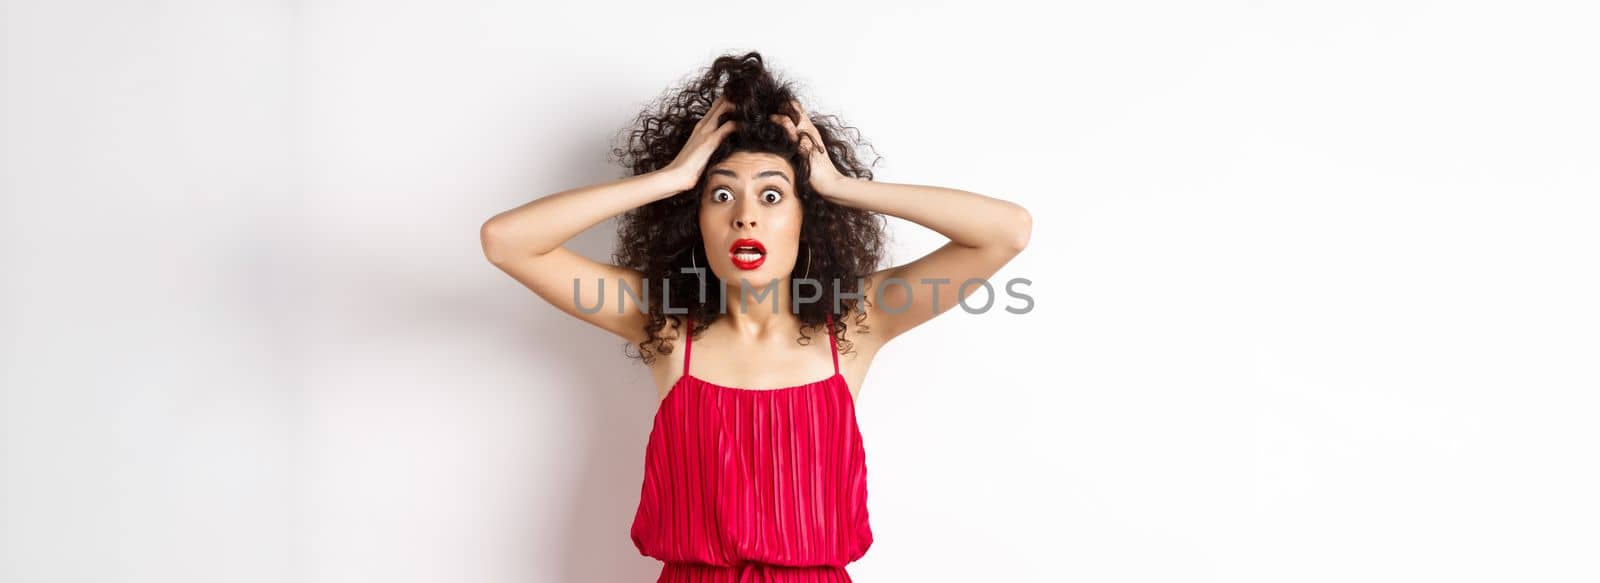 Shocked young woman holding hands on head and panicking, staring frustrated at camera, wearing red dress and makeup, white background by Benzoix